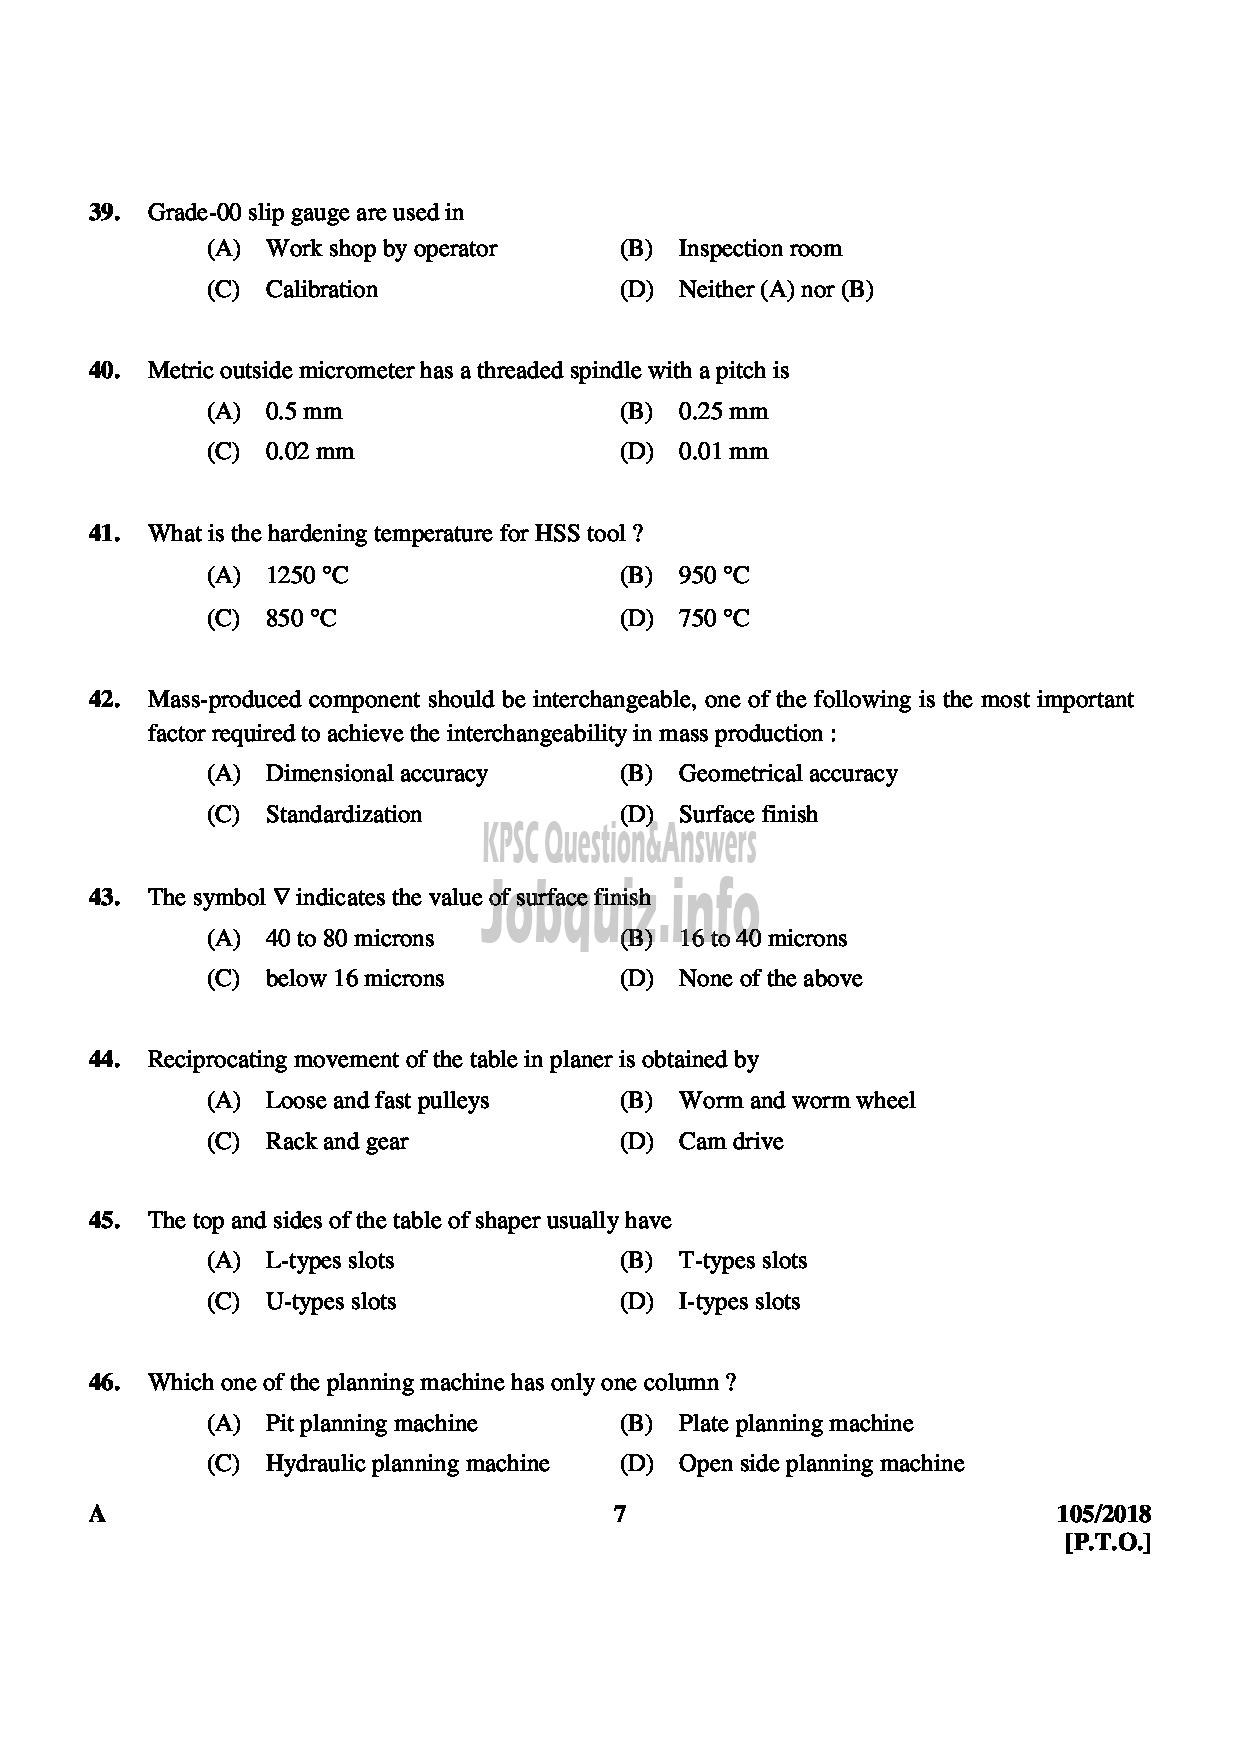 Kerala PSC Question Paper - JUNIOR INSTRUCTOR MACHINIST INDUSTRIAL TRAINING English -7